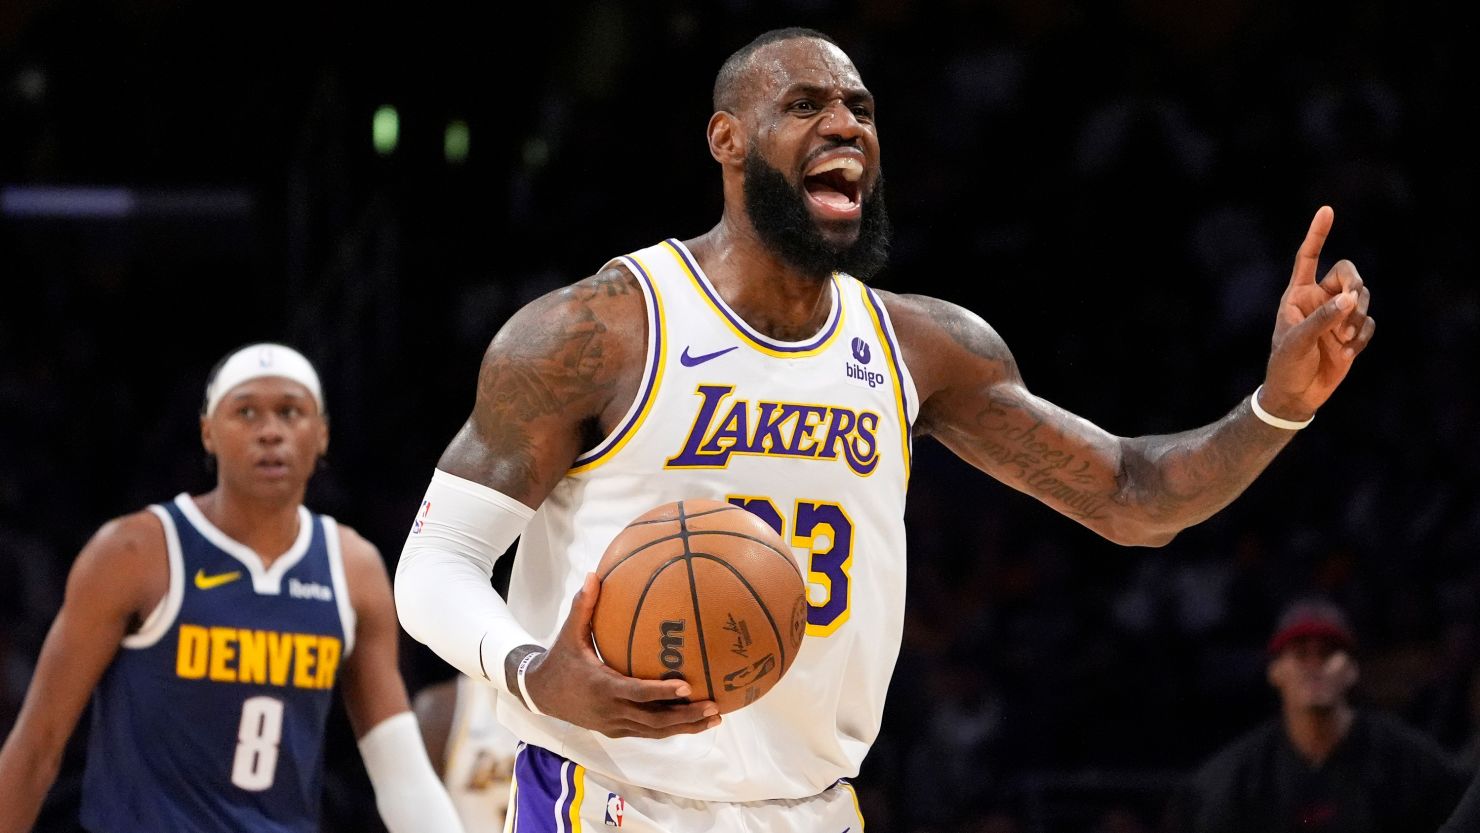 The Lakers beat the Nuggets for the first time since December 2022.